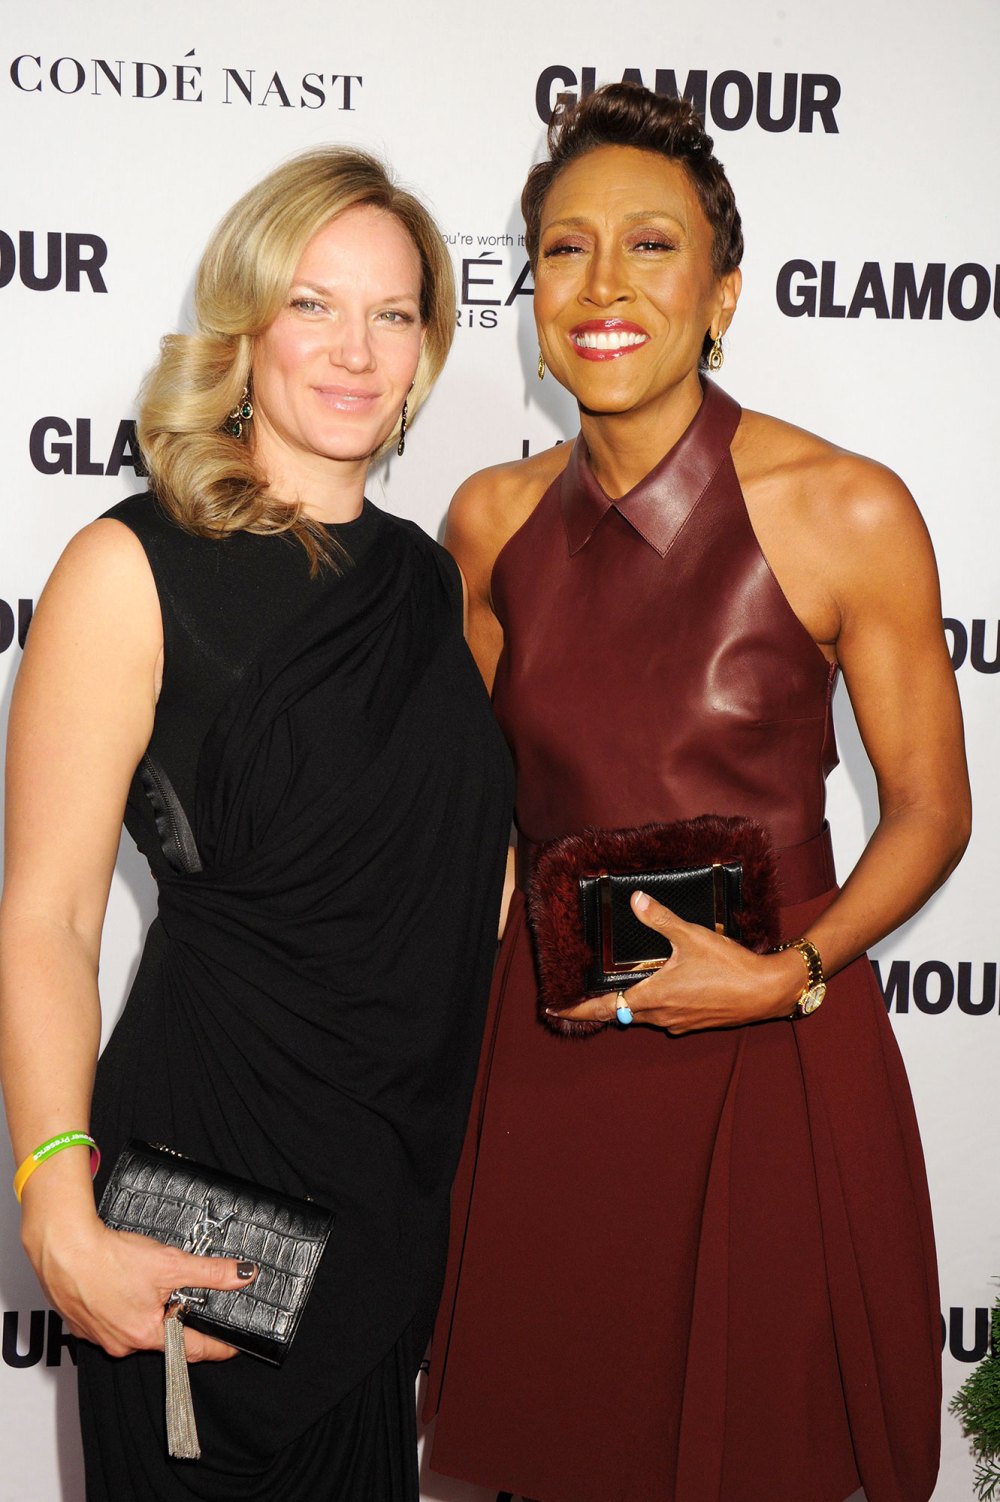 Robin Roberts Says Her Past Health Struggles Brought Her Closer With Fiancee Amber Laign